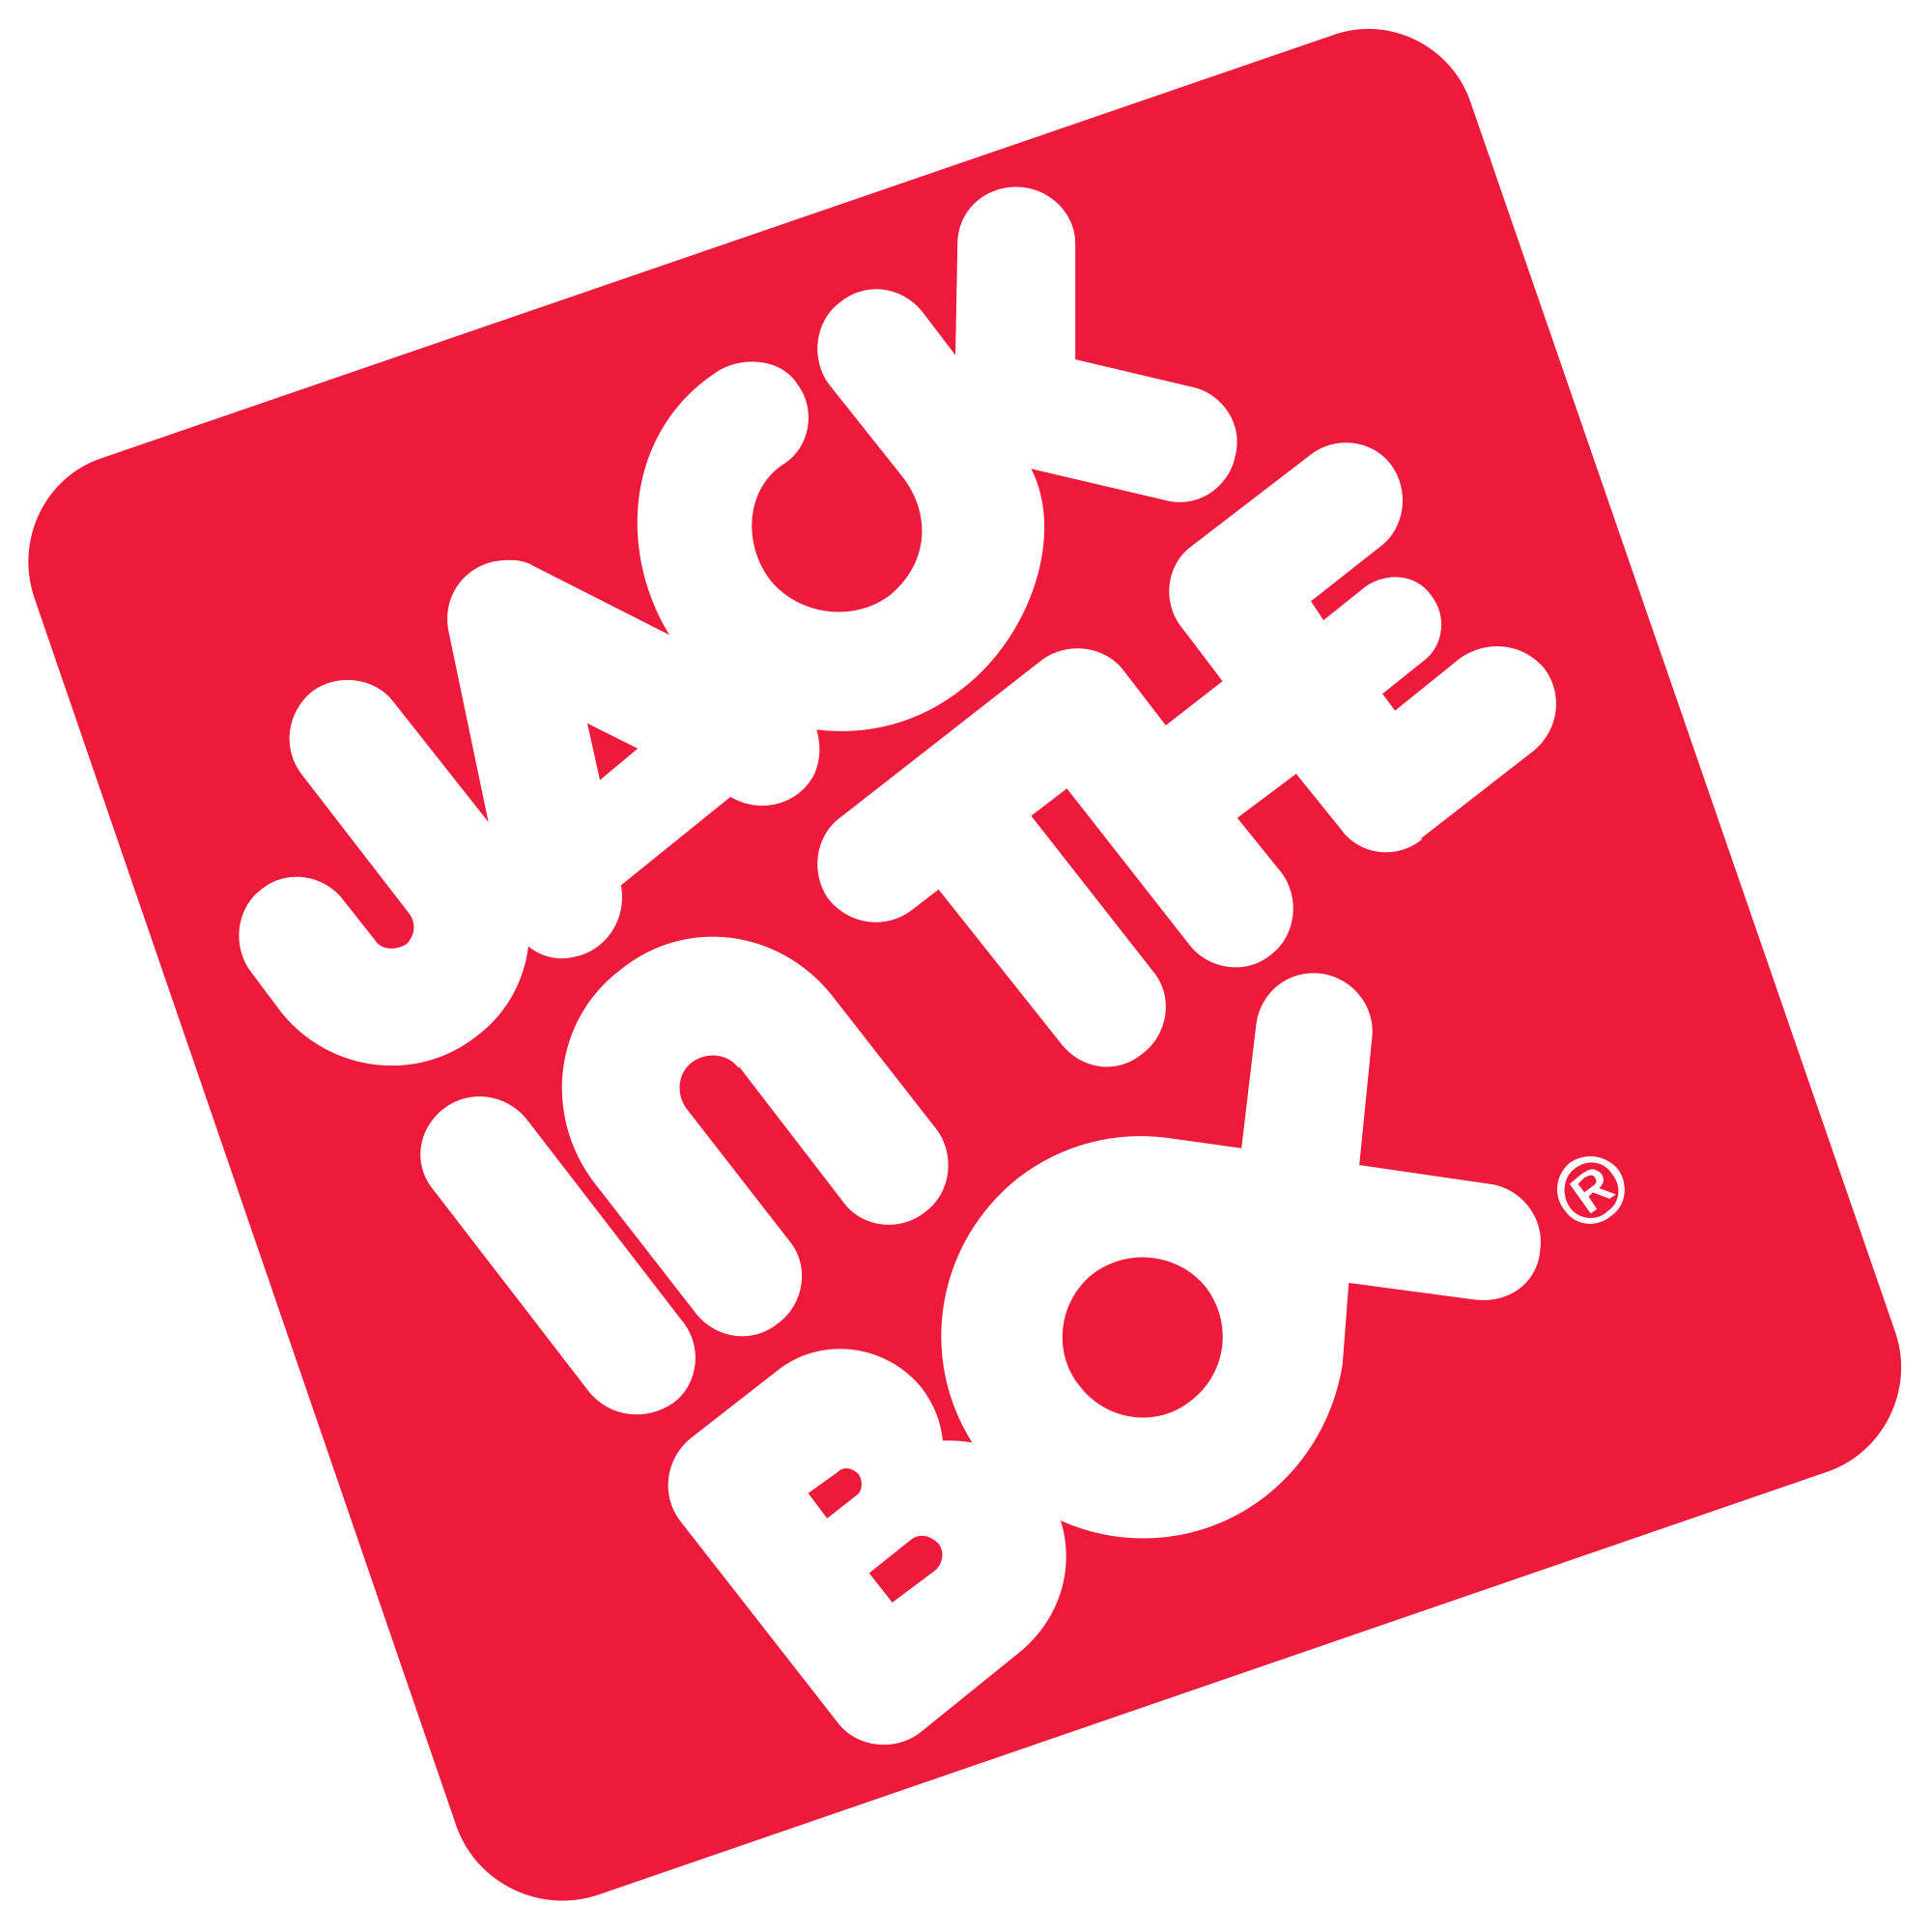 High Resolution Wallpaper | Jack In The Box 2000x2000 px